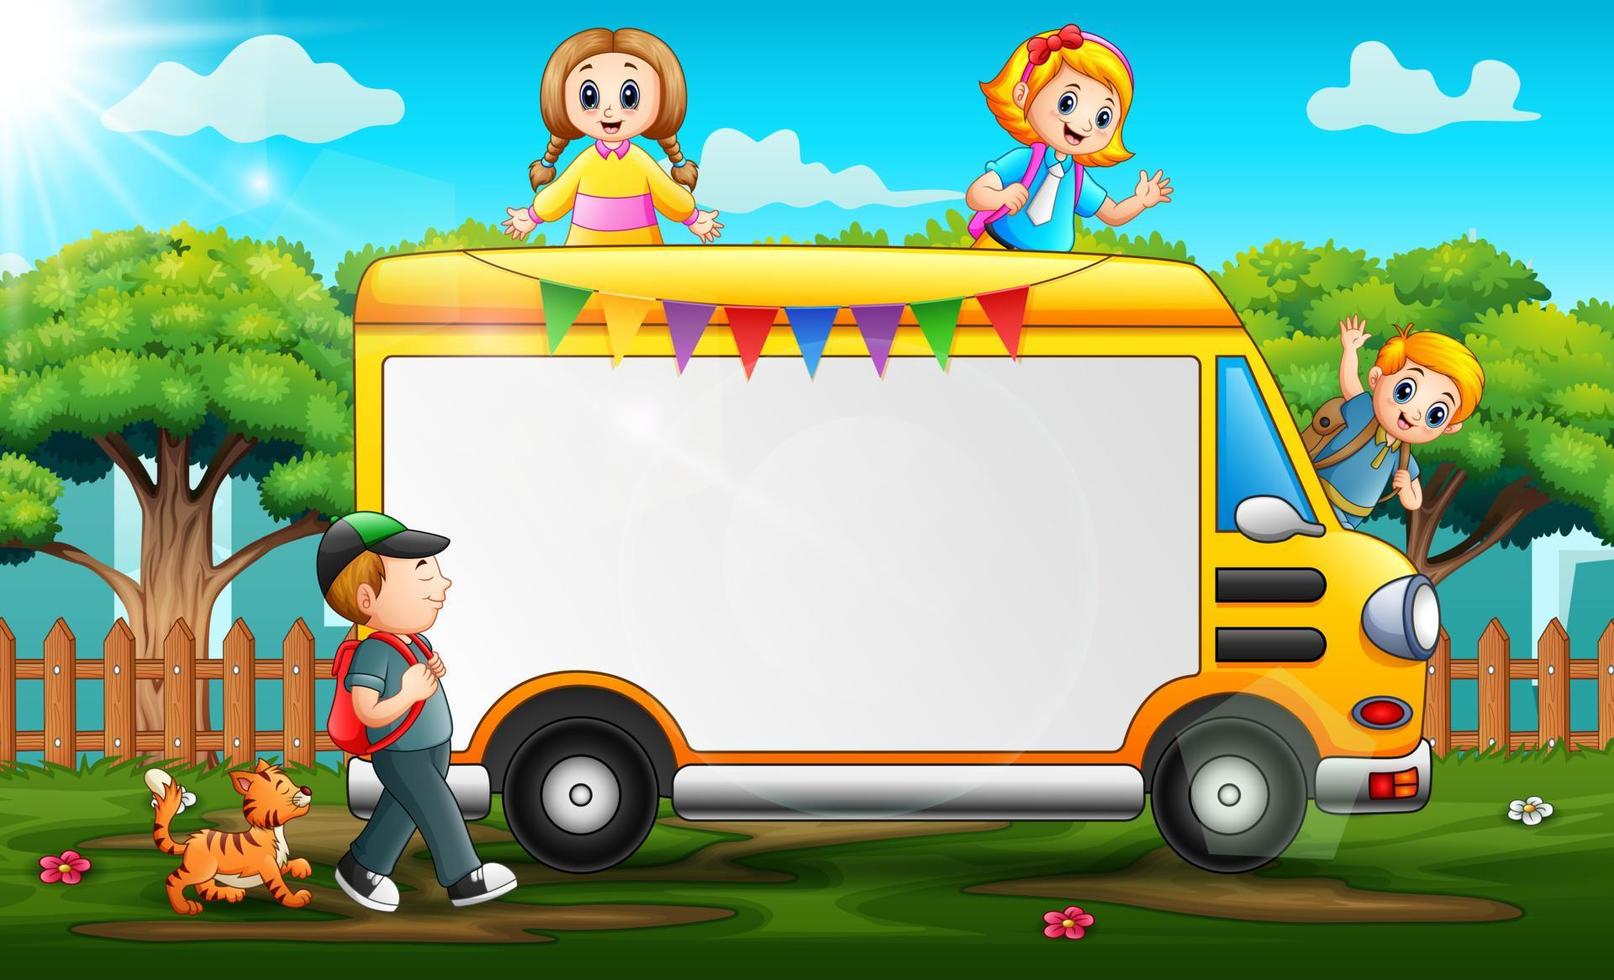 Border template design with school kids on yellow car vector